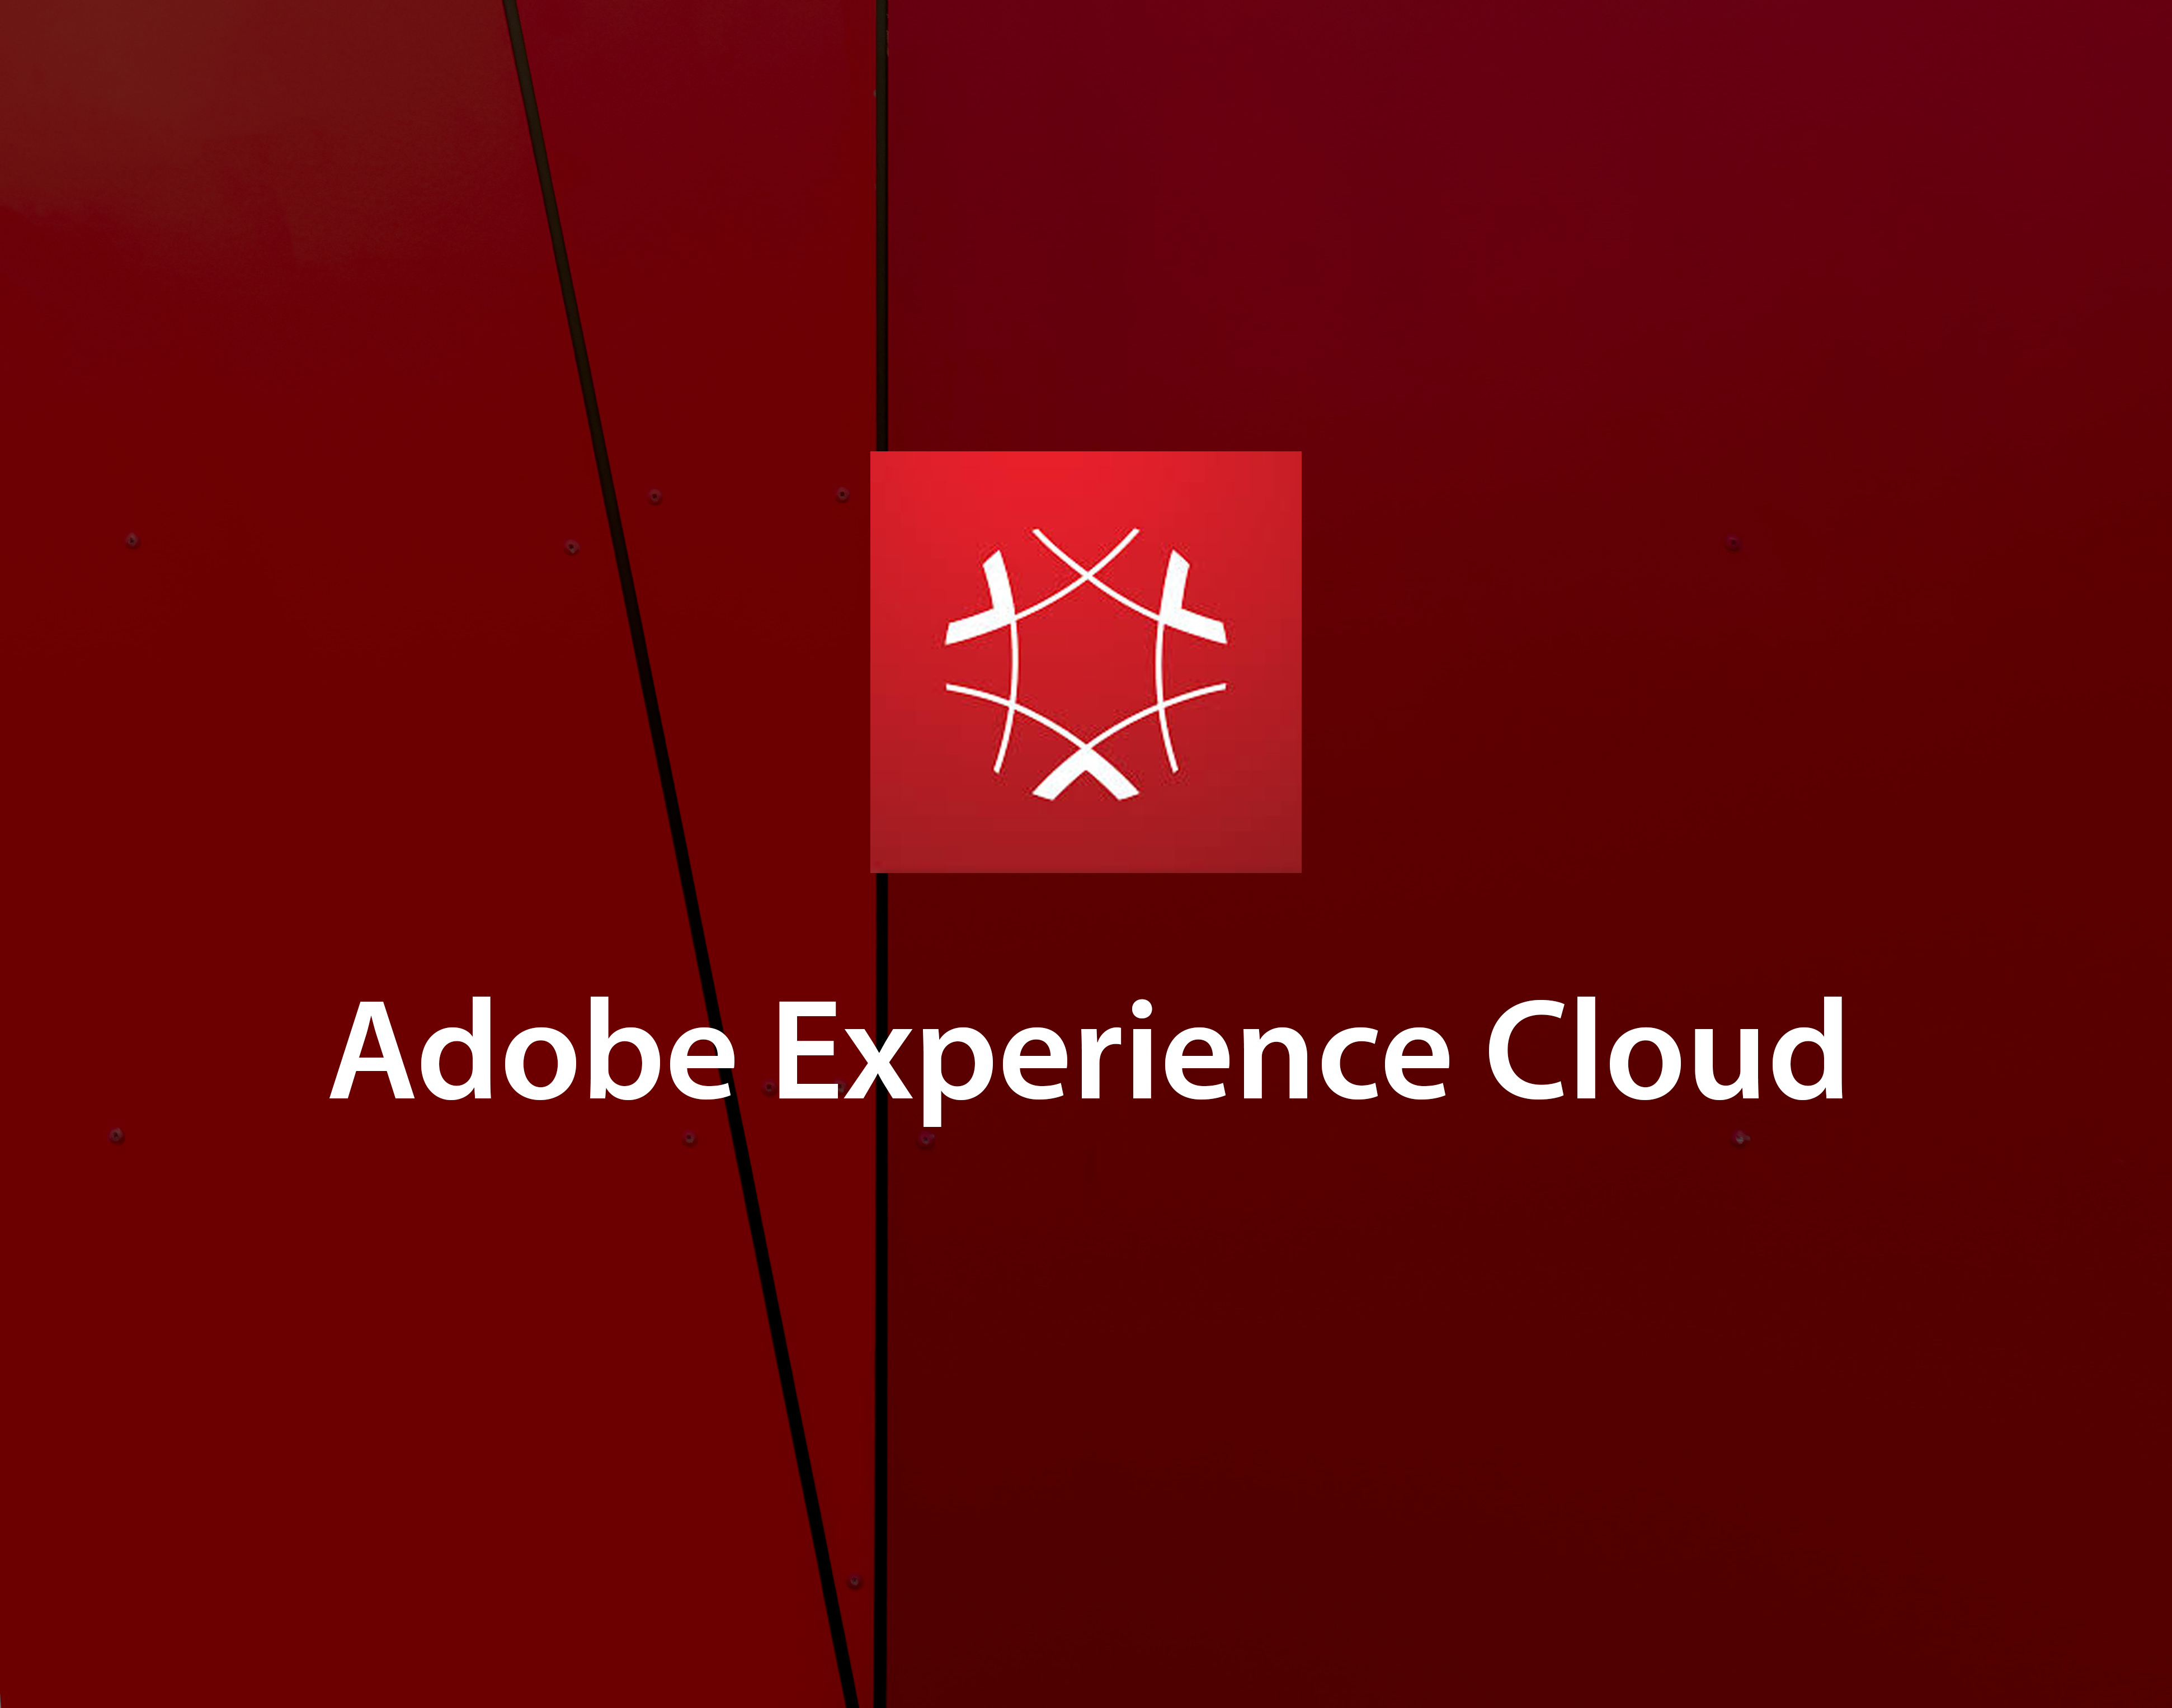 What is Adobe Experience Cloud?